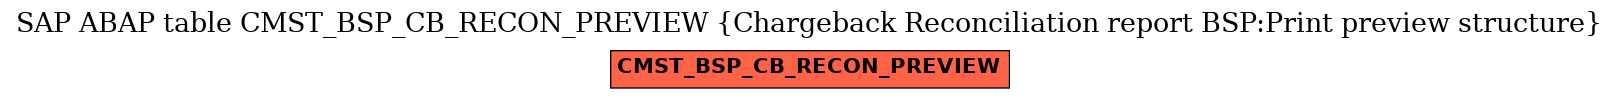 E-R Diagram for table CMST_BSP_CB_RECON_PREVIEW (Chargeback Reconciliation report BSP:Print preview structure)